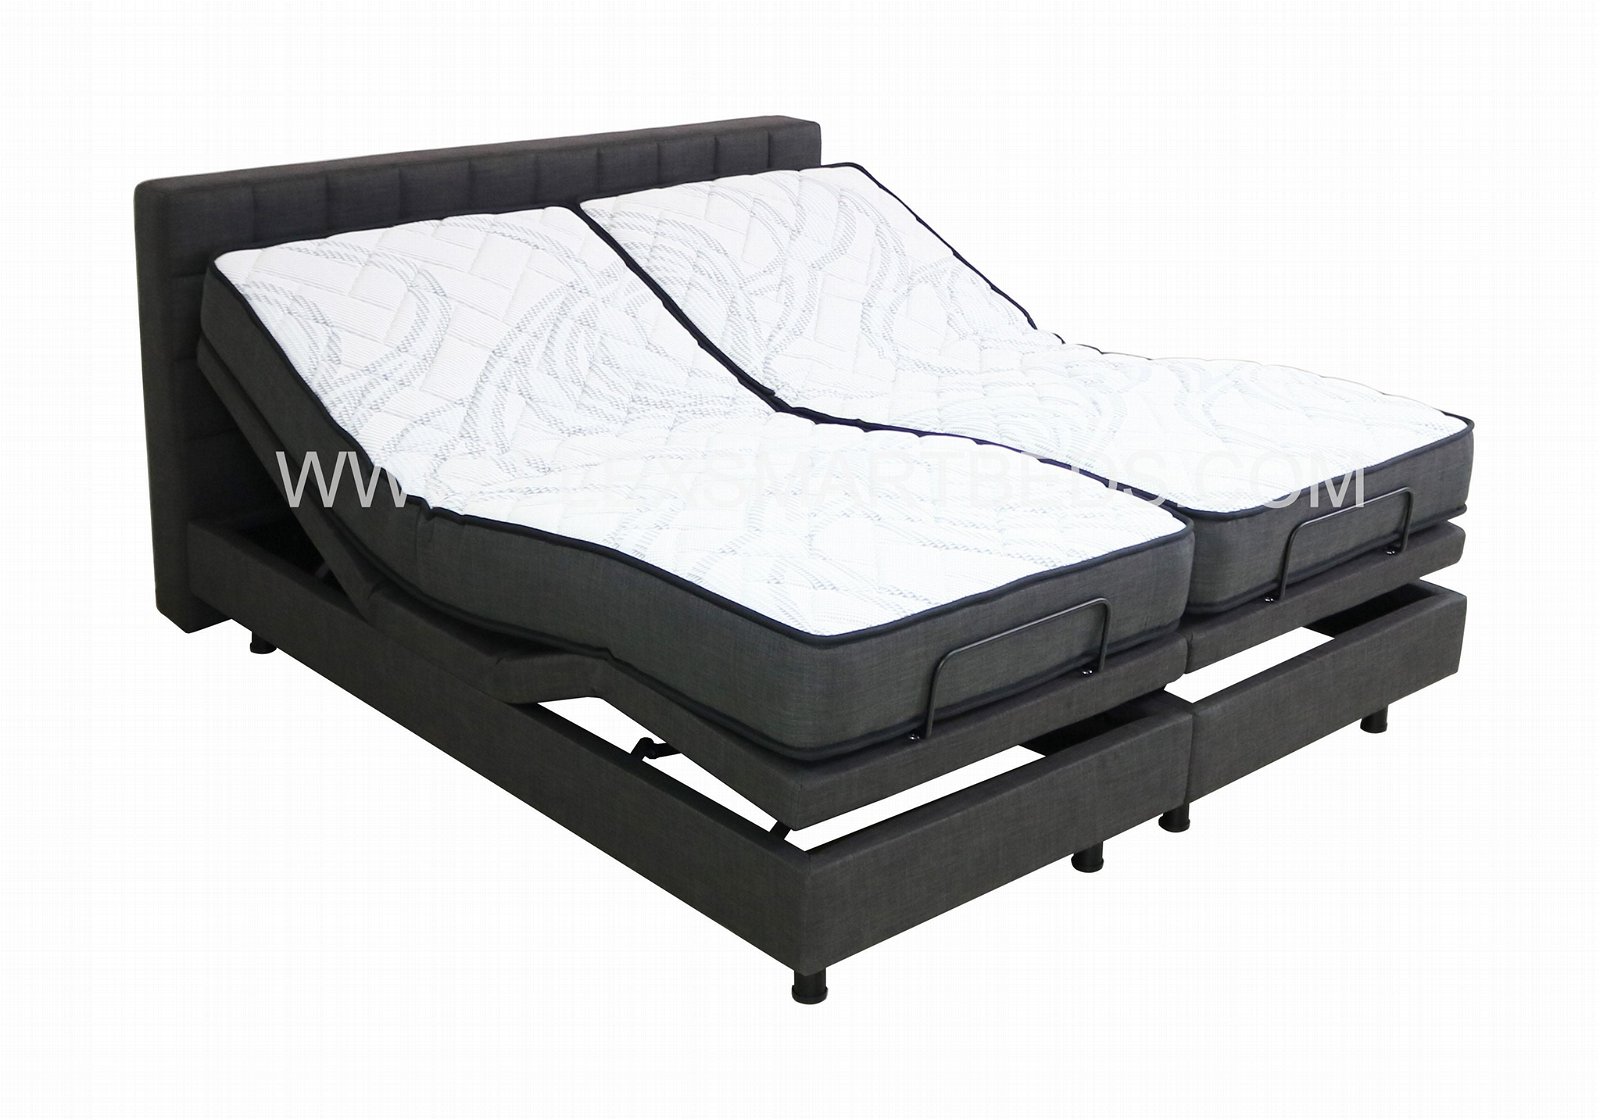 Adjustable Beds for Home Use